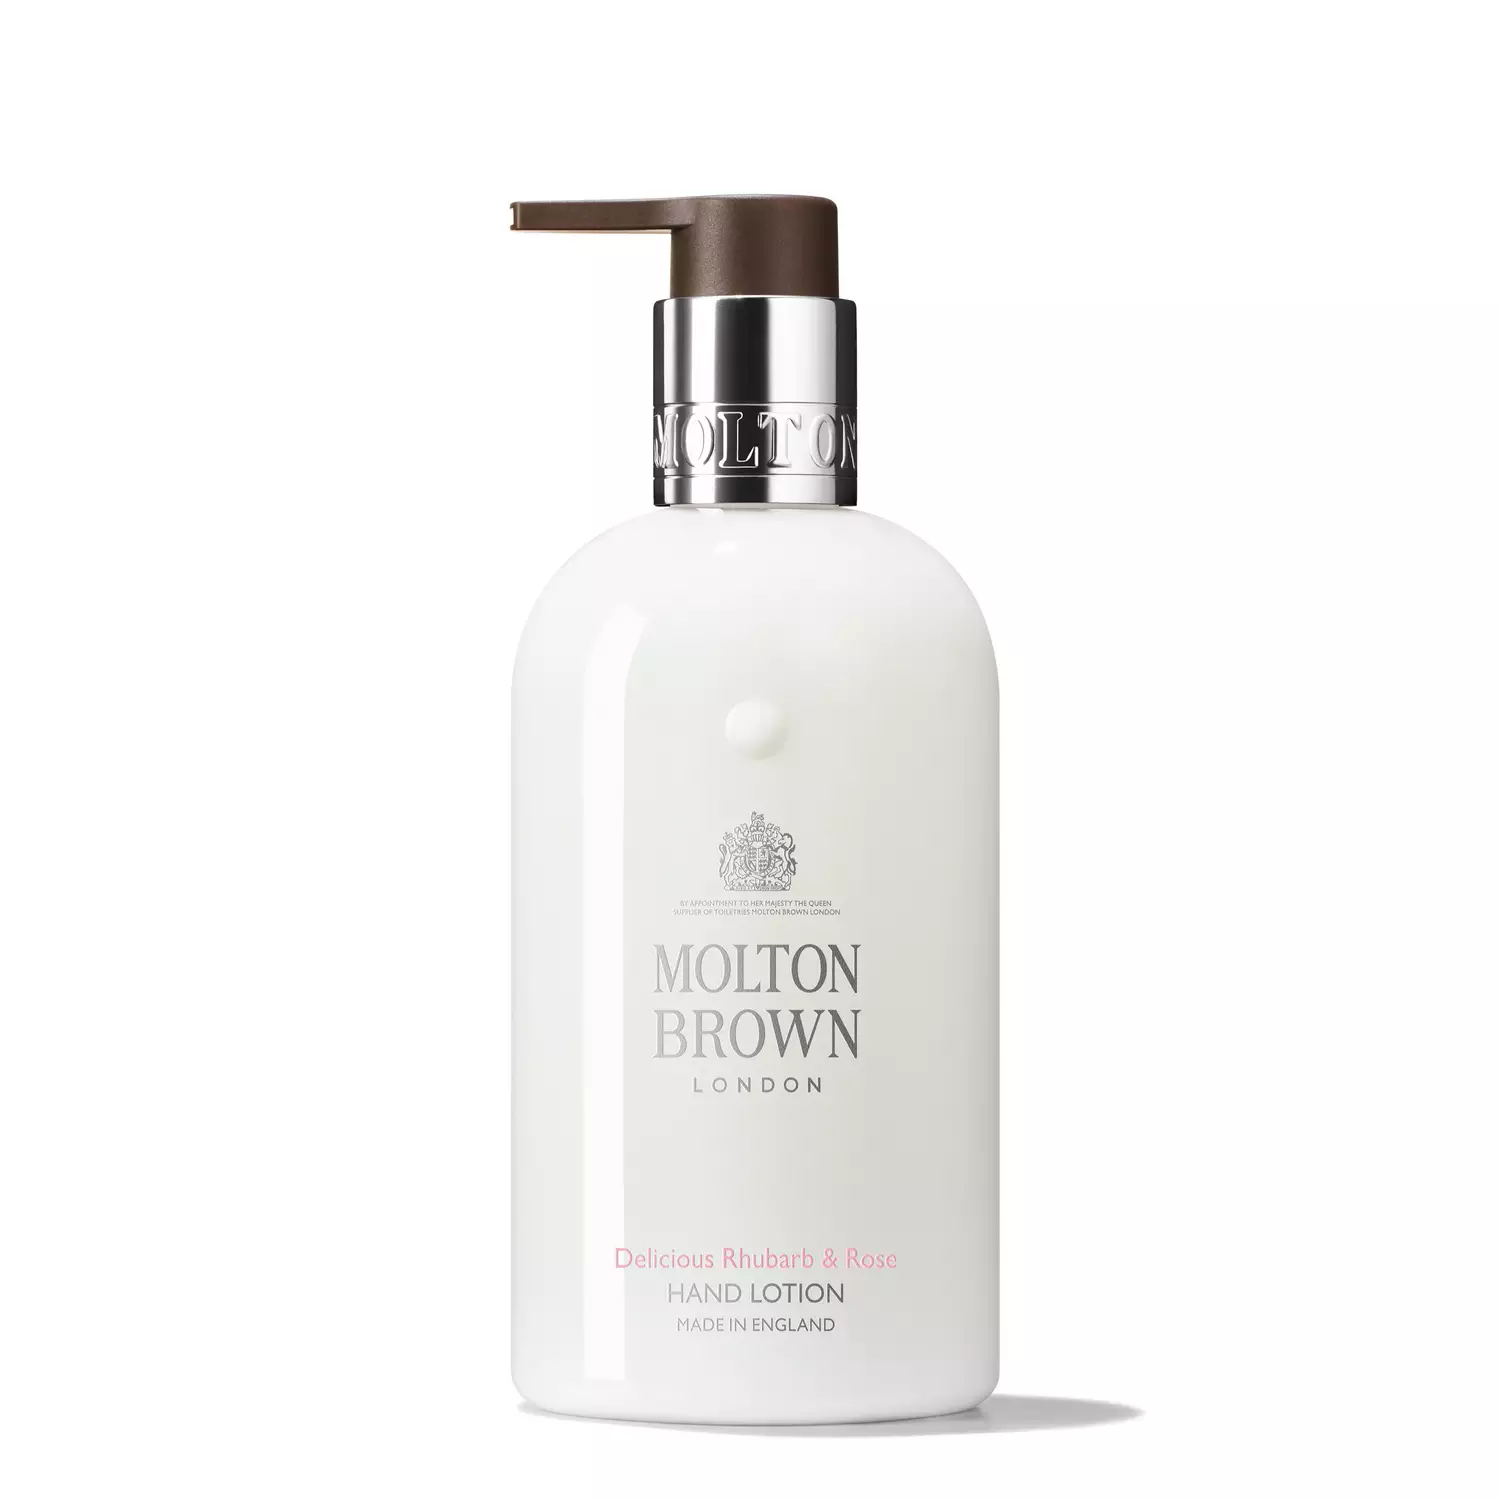 Molton Brown - Delicious Rhubarb & Rose - Hand Lotion 